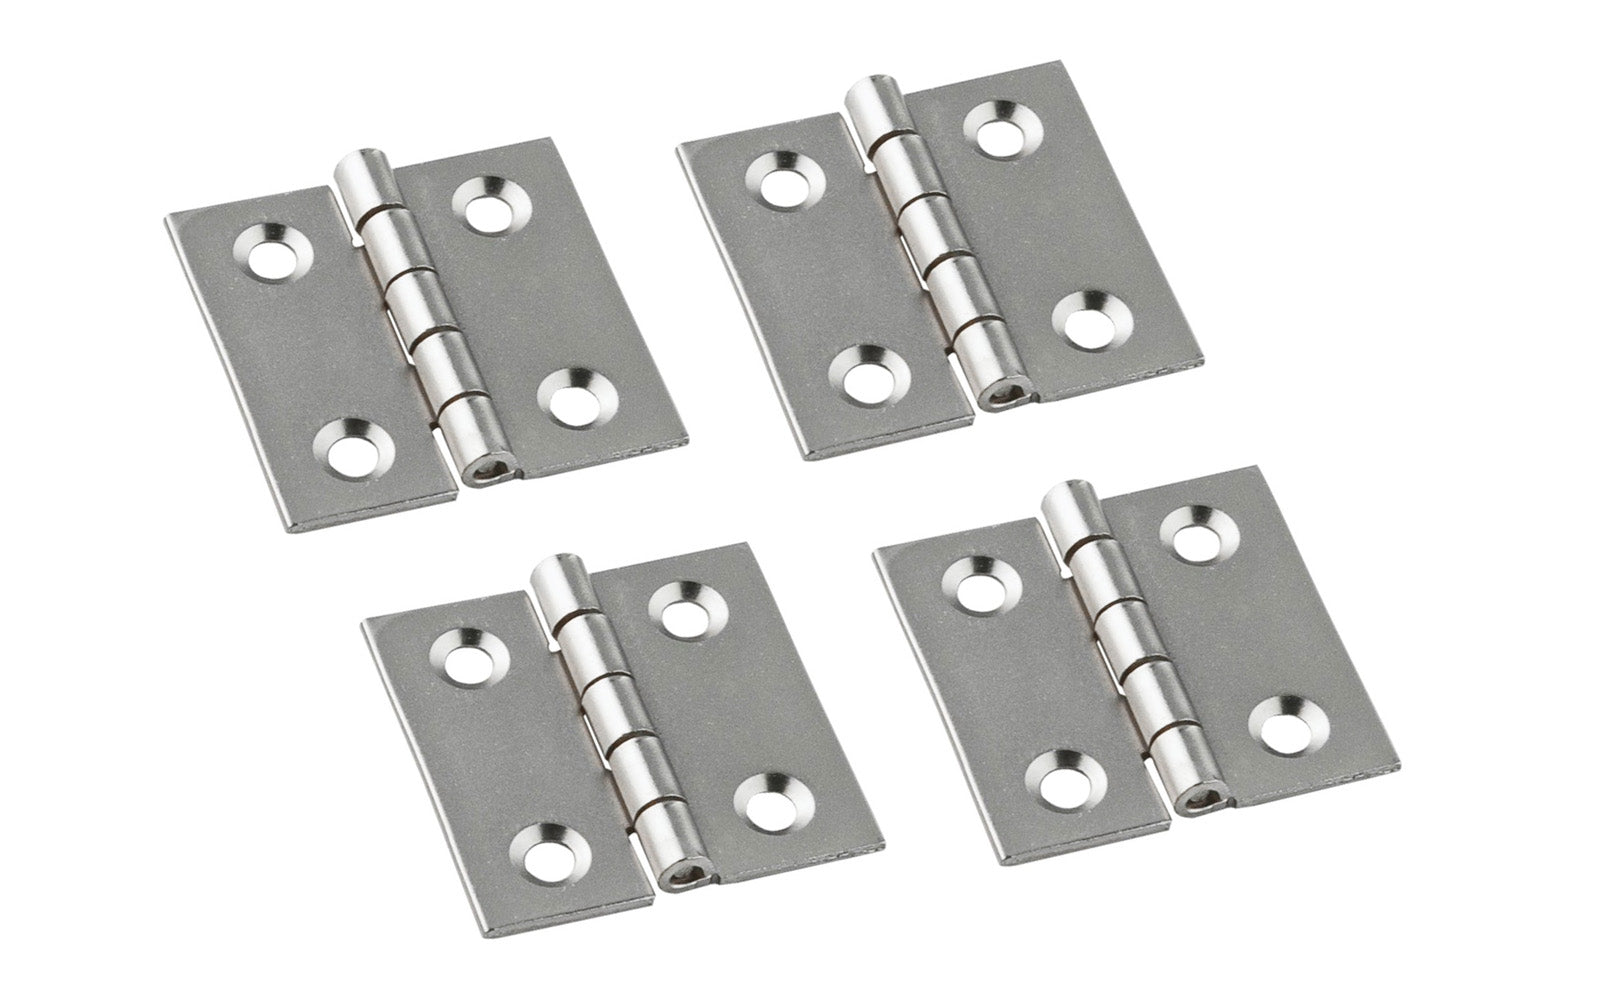 1" x 1" Satin Nickel Hinges ~ 4 Pack ~ These miniature hinges are designed to add a decorative appearance to small chests, jewelry boxes, craft projects, etc. Made of steel material with a satin nickel finish. 1" high x 1" wide. Surface mount. Non-removable pin. Sold as 4 hinges in pack. National Hardware Model No. N211-013. 886780014211. 4 Pack